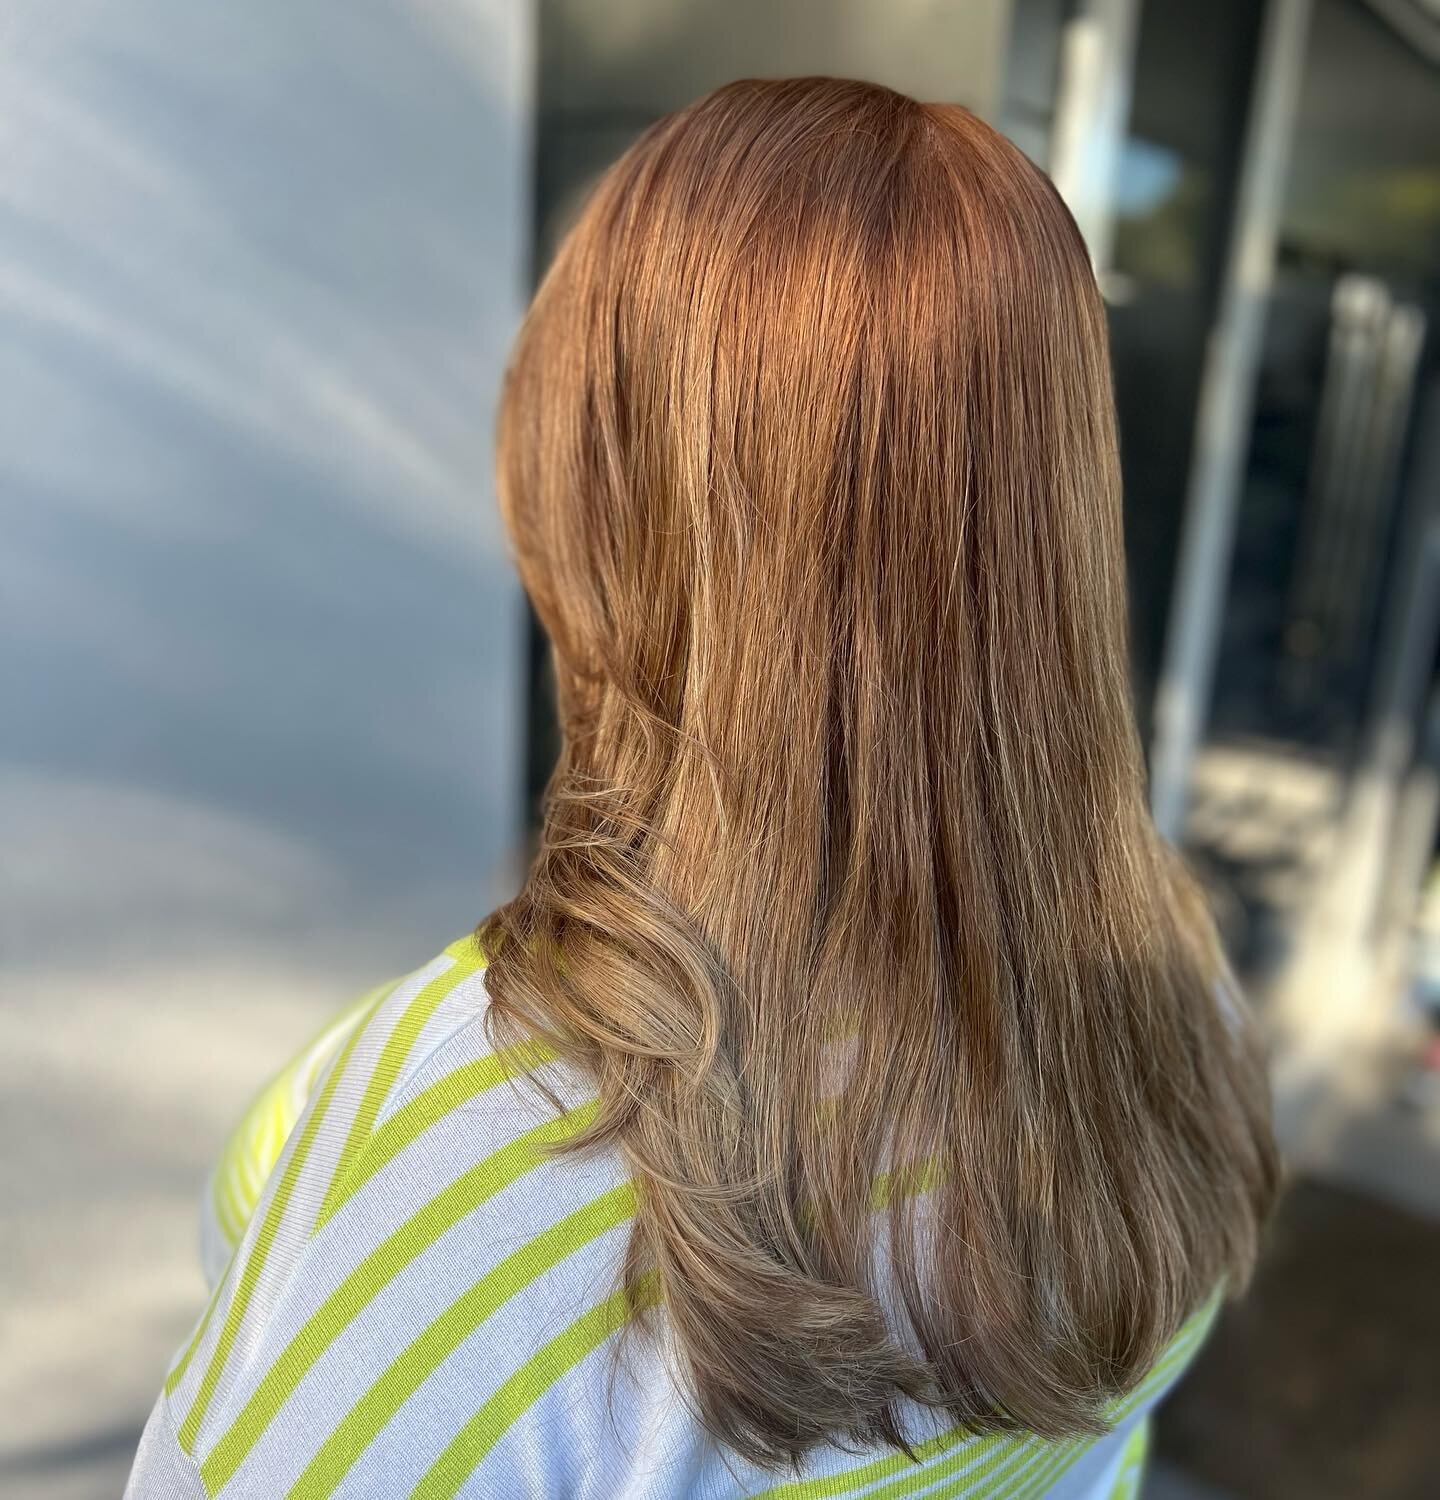 Loving this copper gold creation! 😍
Jenny created this masterpiece with face framing foils &amp; an all over colour, finished with a trim &amp; glamorous blow dry 👌🏼
Warmer tones seem to be on trend atm! ✨
Book yours at hairflicks.com or DM us any